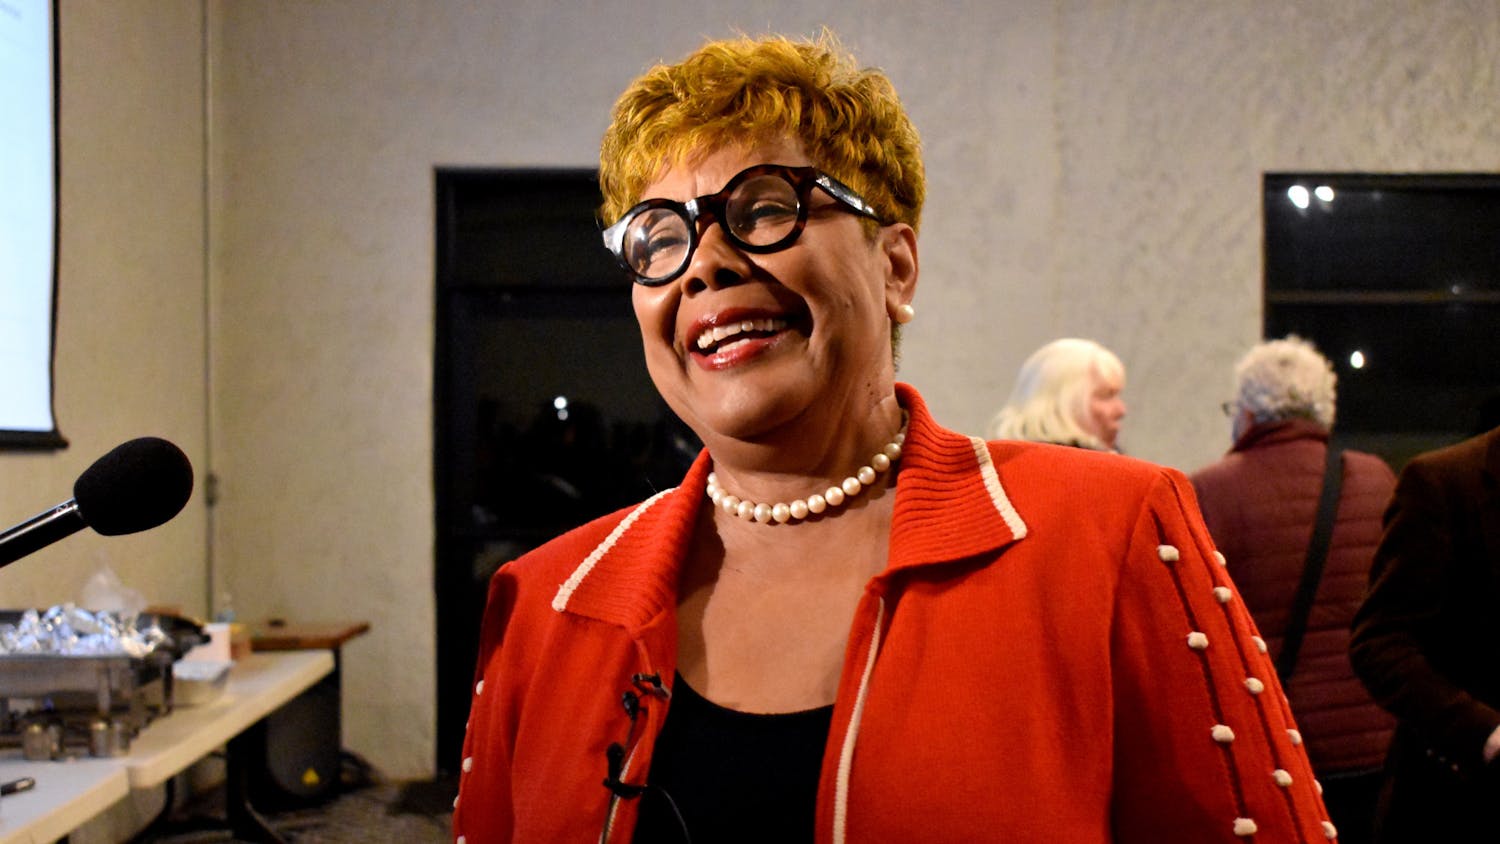 Following 10 weeks of campaigning, Cynthia Moore Chestnut won the Gainesville special runoff election Tuesday by 244 votes. Chestnut led with nearly 51% of the 12,280 ballots cast while Howland had about 49%. The city’s voter turnout for the special run-off election was about 13.6%, a 0.55% increase compared to the November special election.&nbsp;